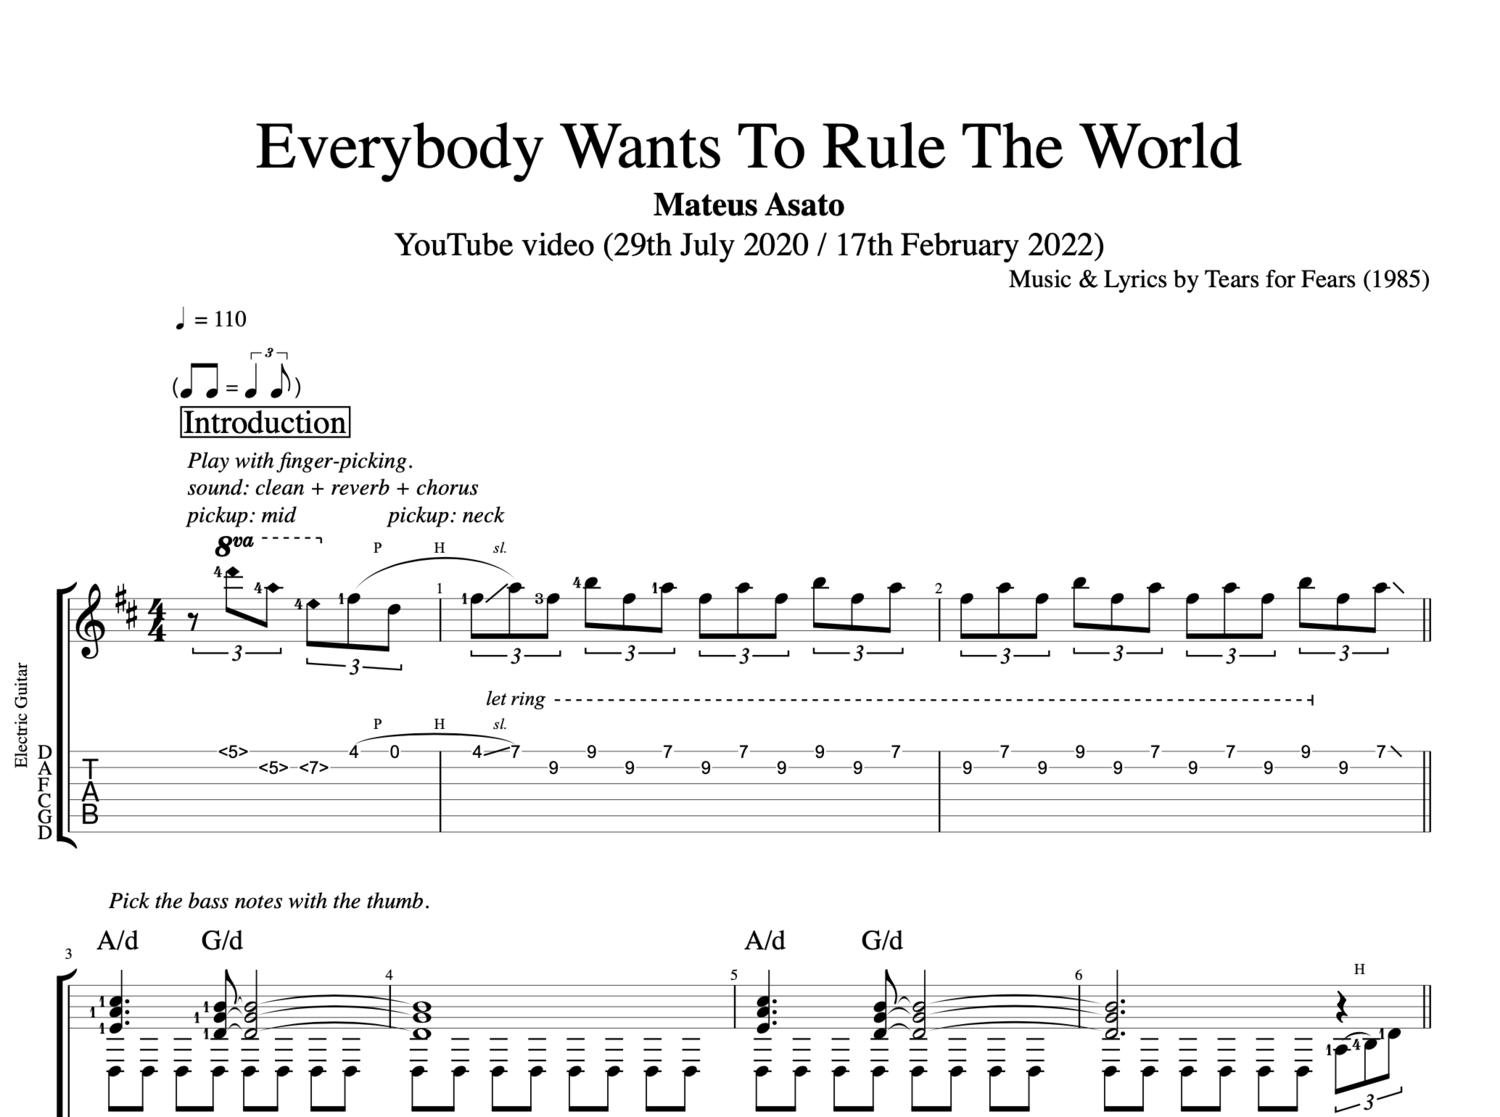 Everybody Wants To Rule The World - song and lyrics by Tears For